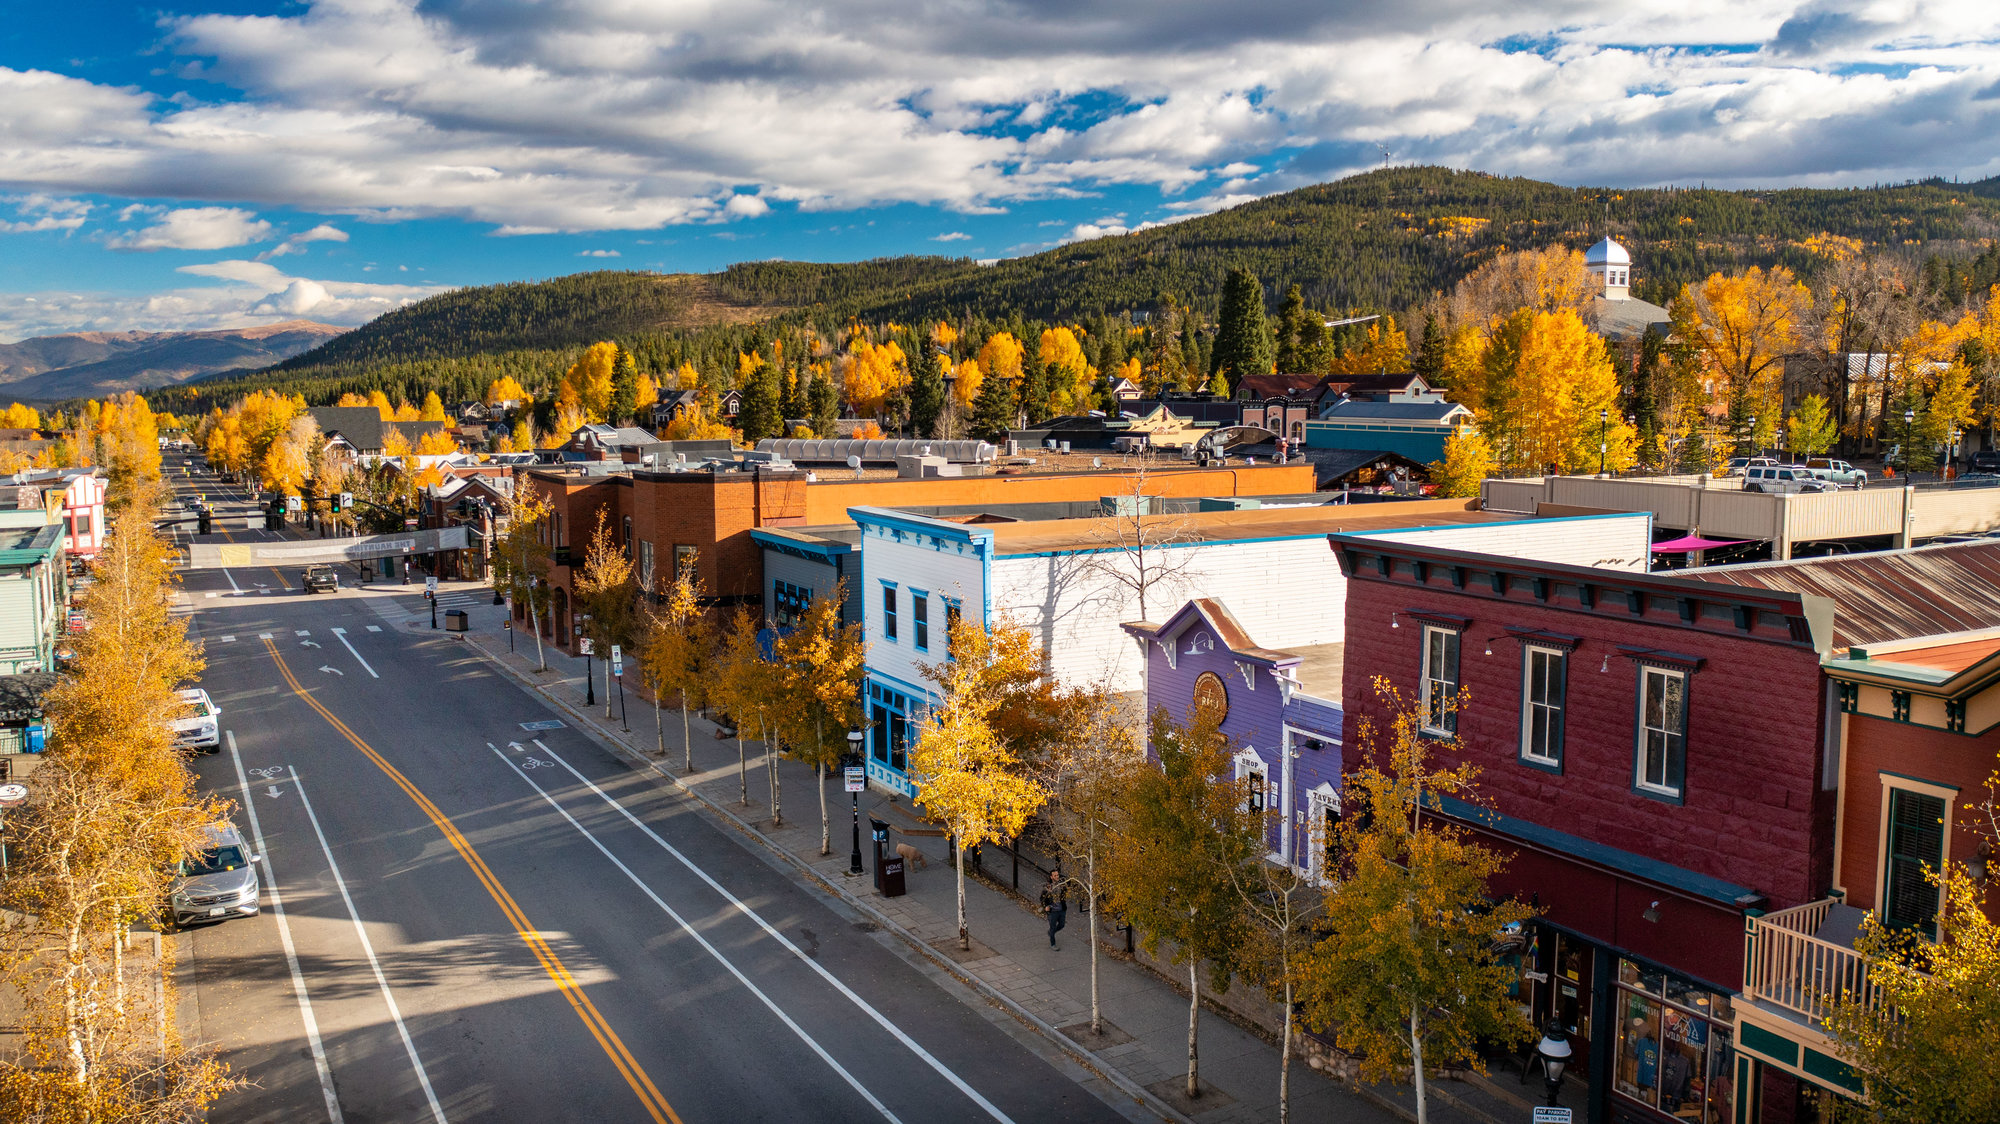 Commercial Real Estate Opportunity on Main Street in Breckenridge, CO